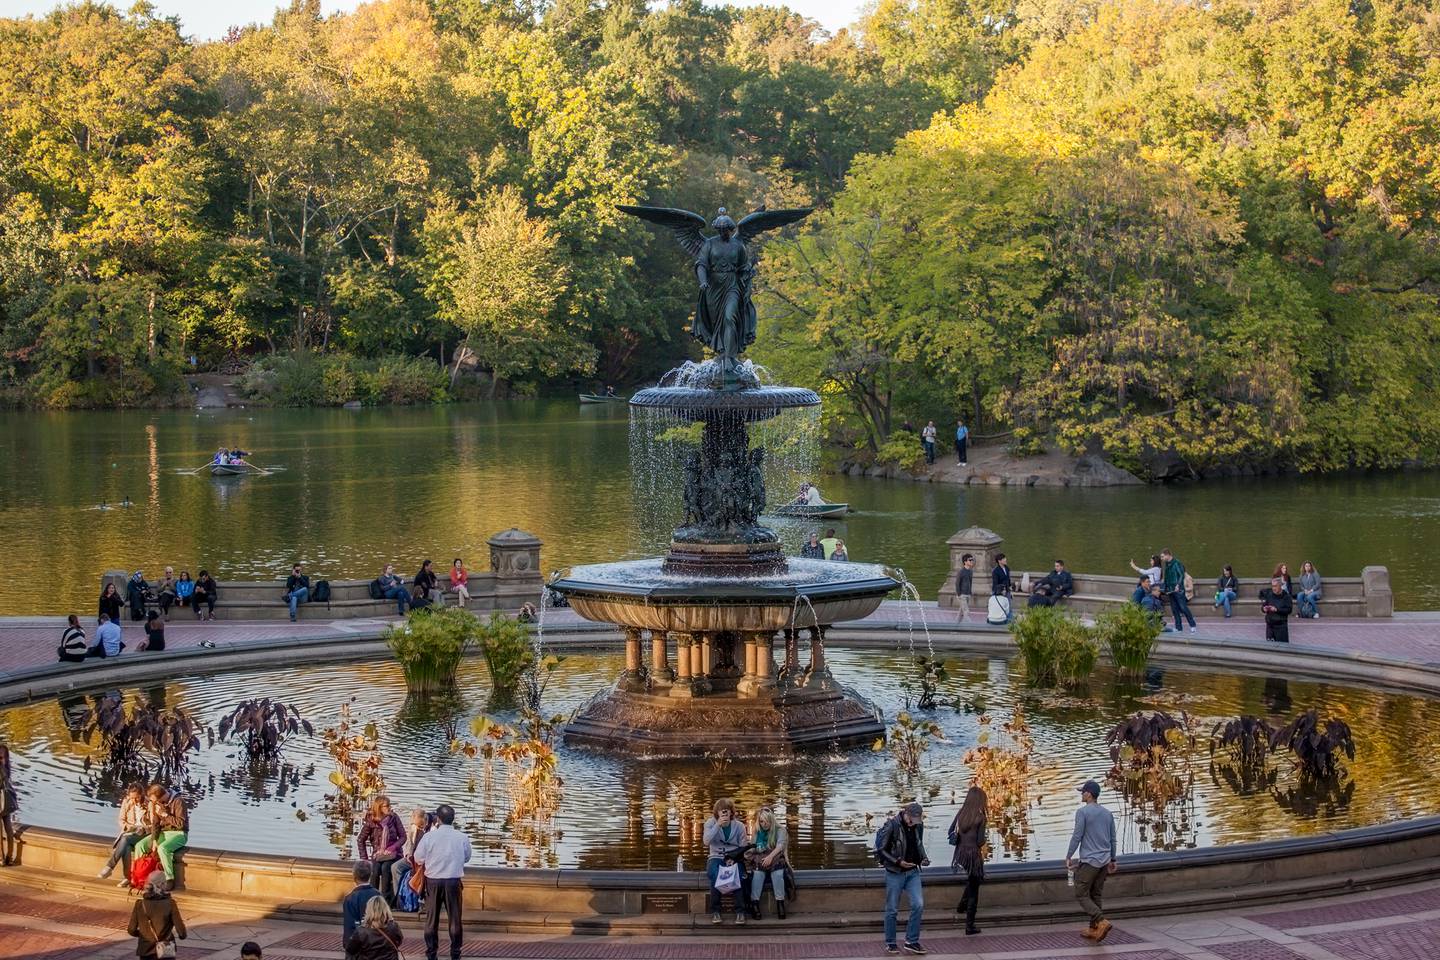 Bethesda Foutain was the only sculpture commissioned during the original design of Central Park. Photo: Christopher Postlewaite / NYC & Company